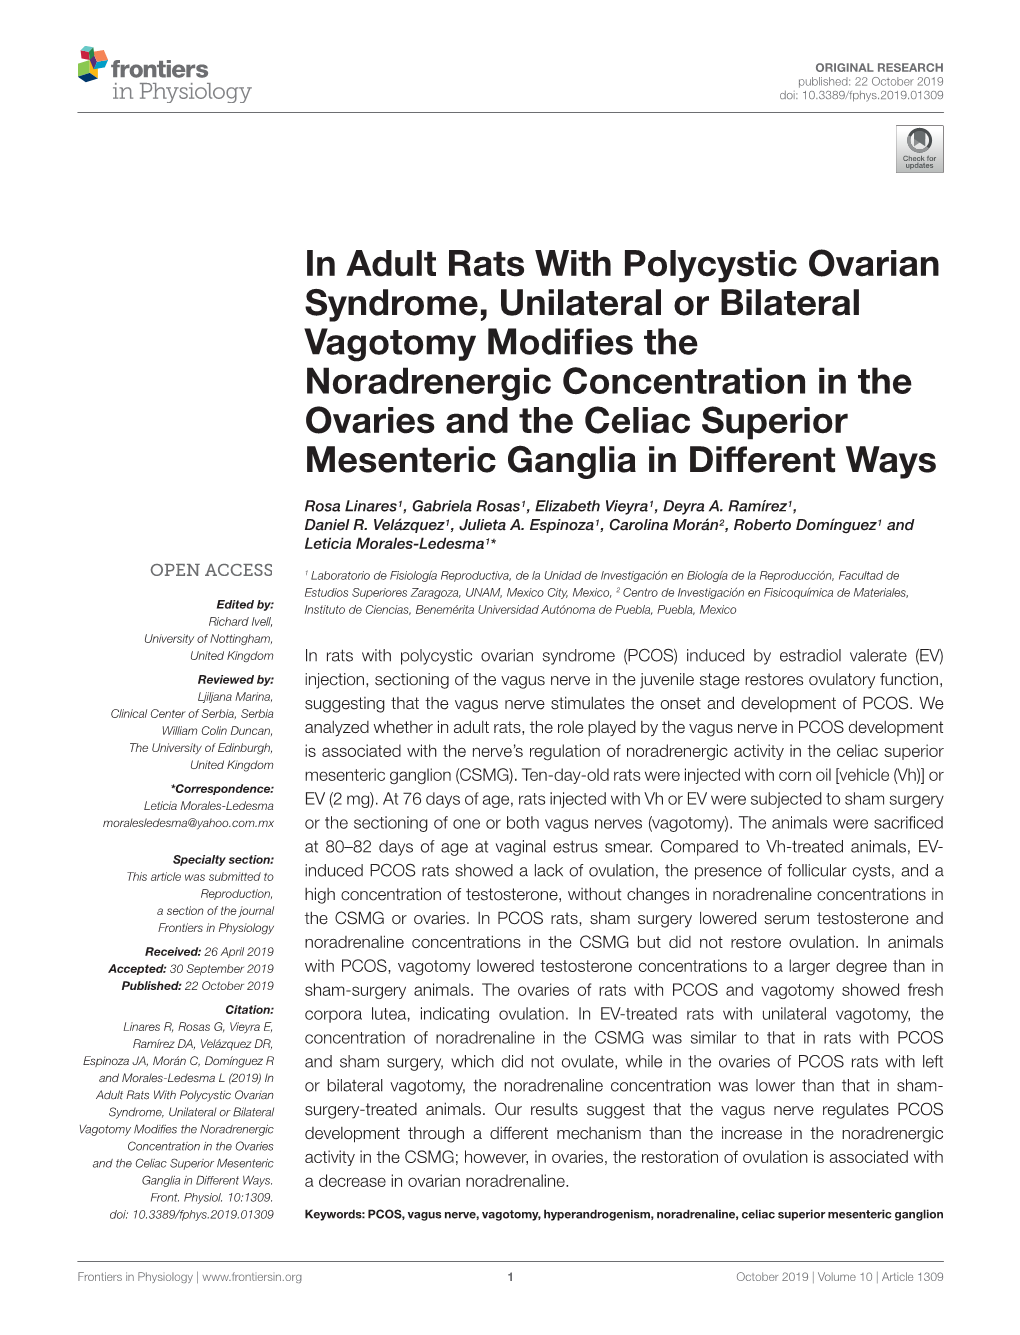 In Adult Rats with Polycystic Ovarian Syndrome, Unilateral Or Bilateral